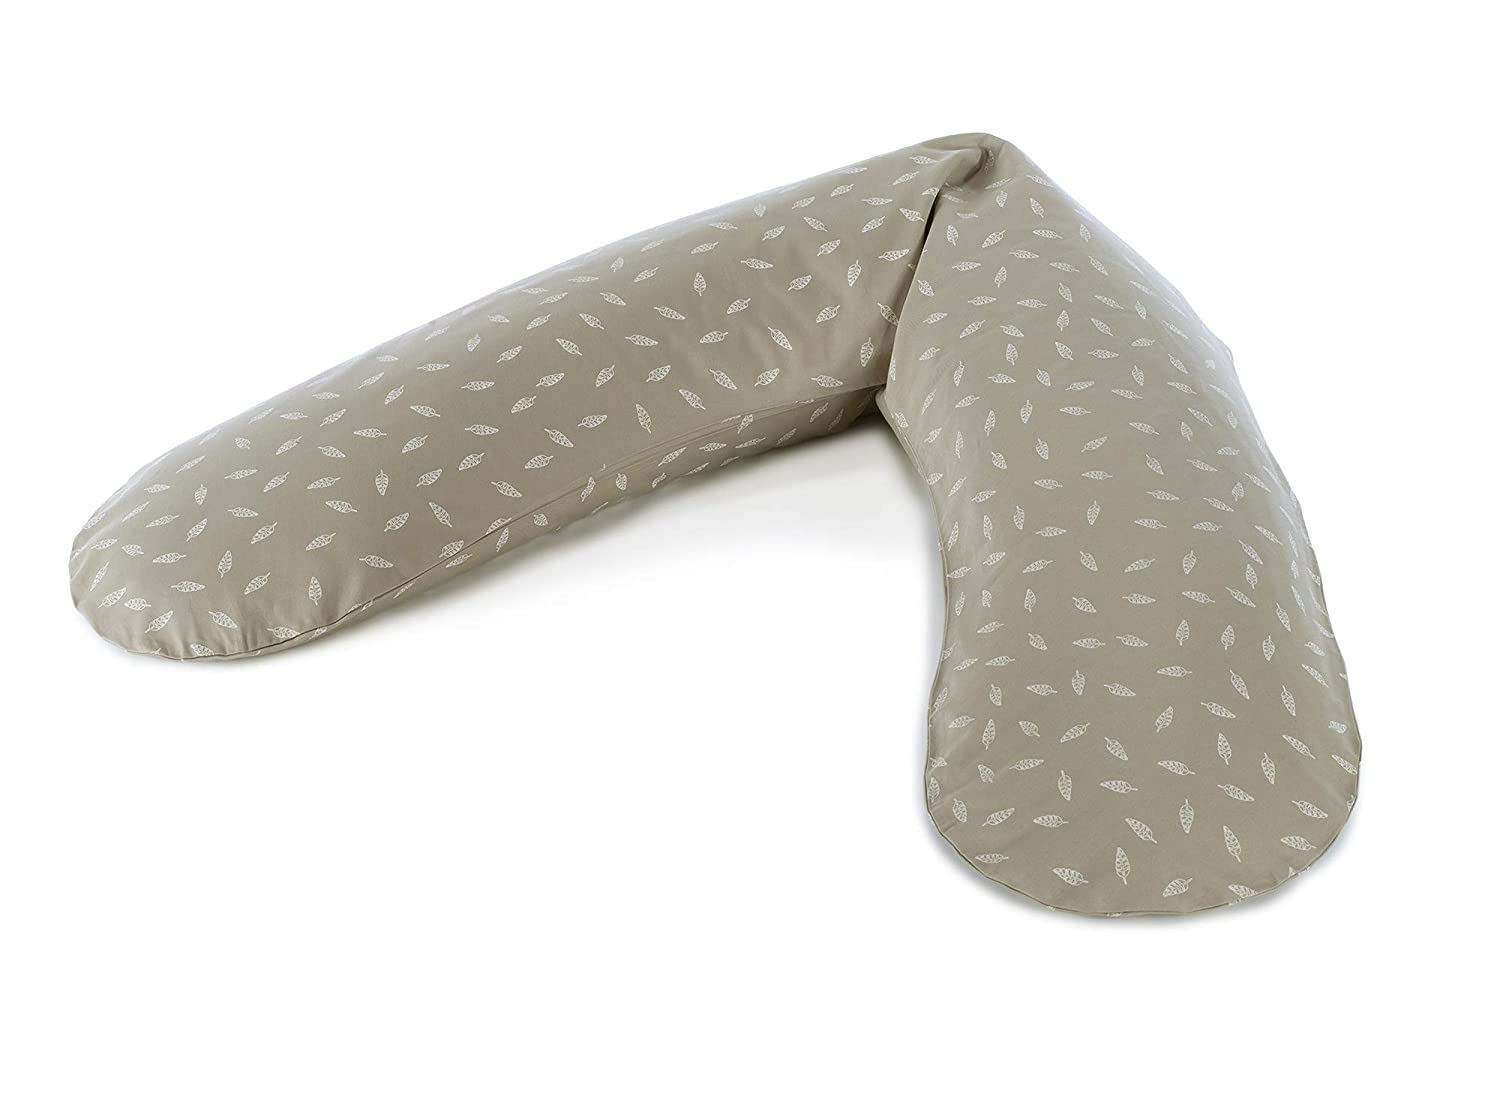 Replacement Cover For The Original Theraline Pregnancy And Nursing Pillow, 100% Cotton. Pattern Leaf Dance Taupe